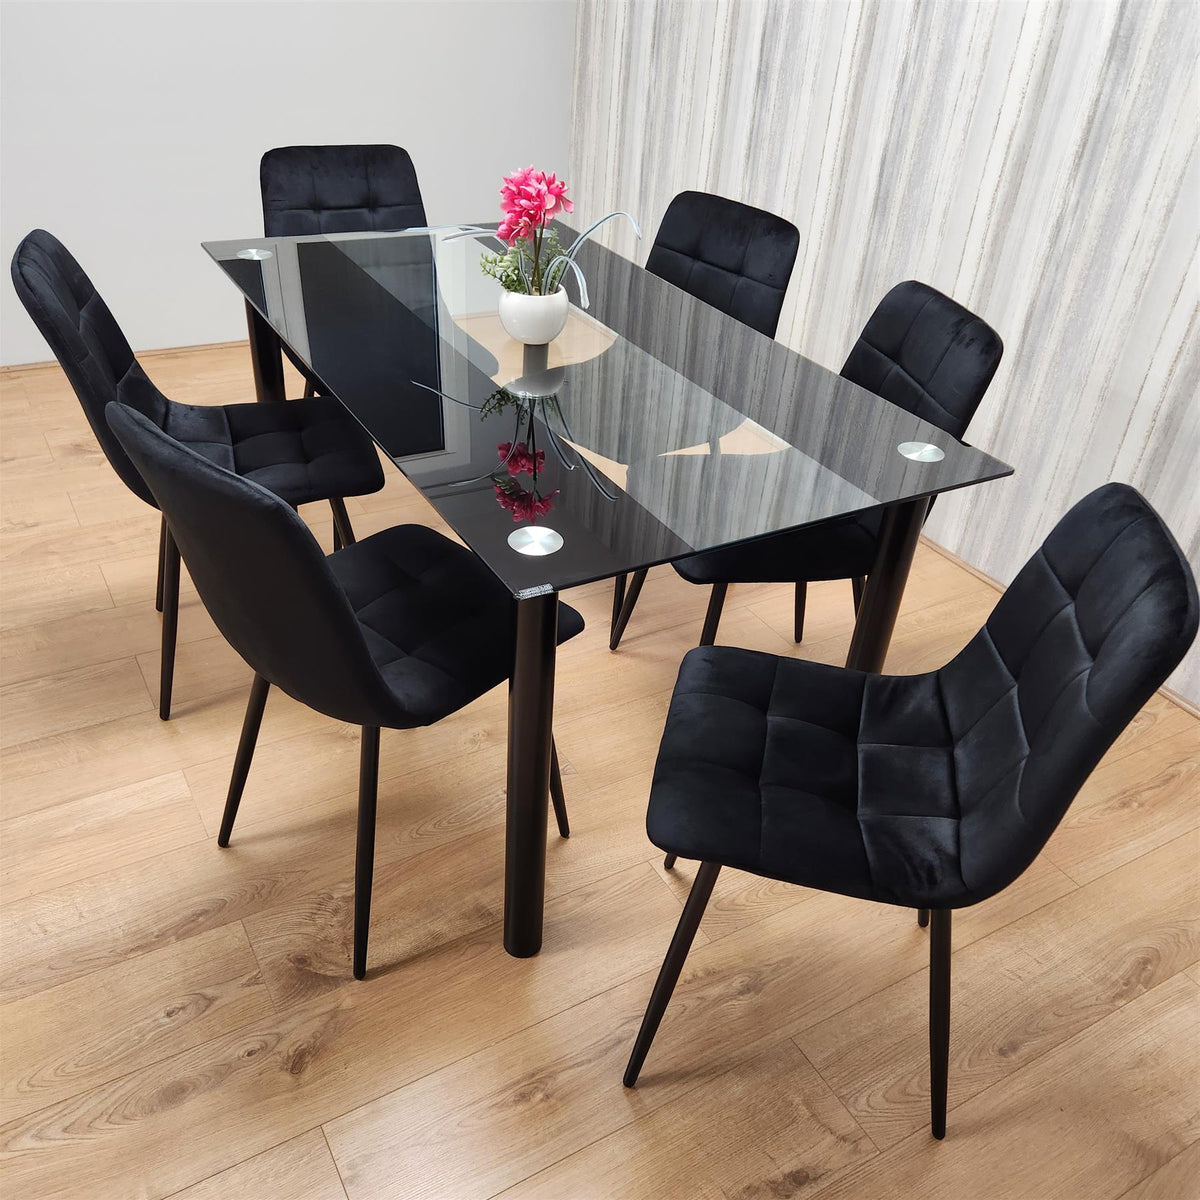 Dining Table Set with 6 Chairs Dining Room, and Kitchen table set of 6